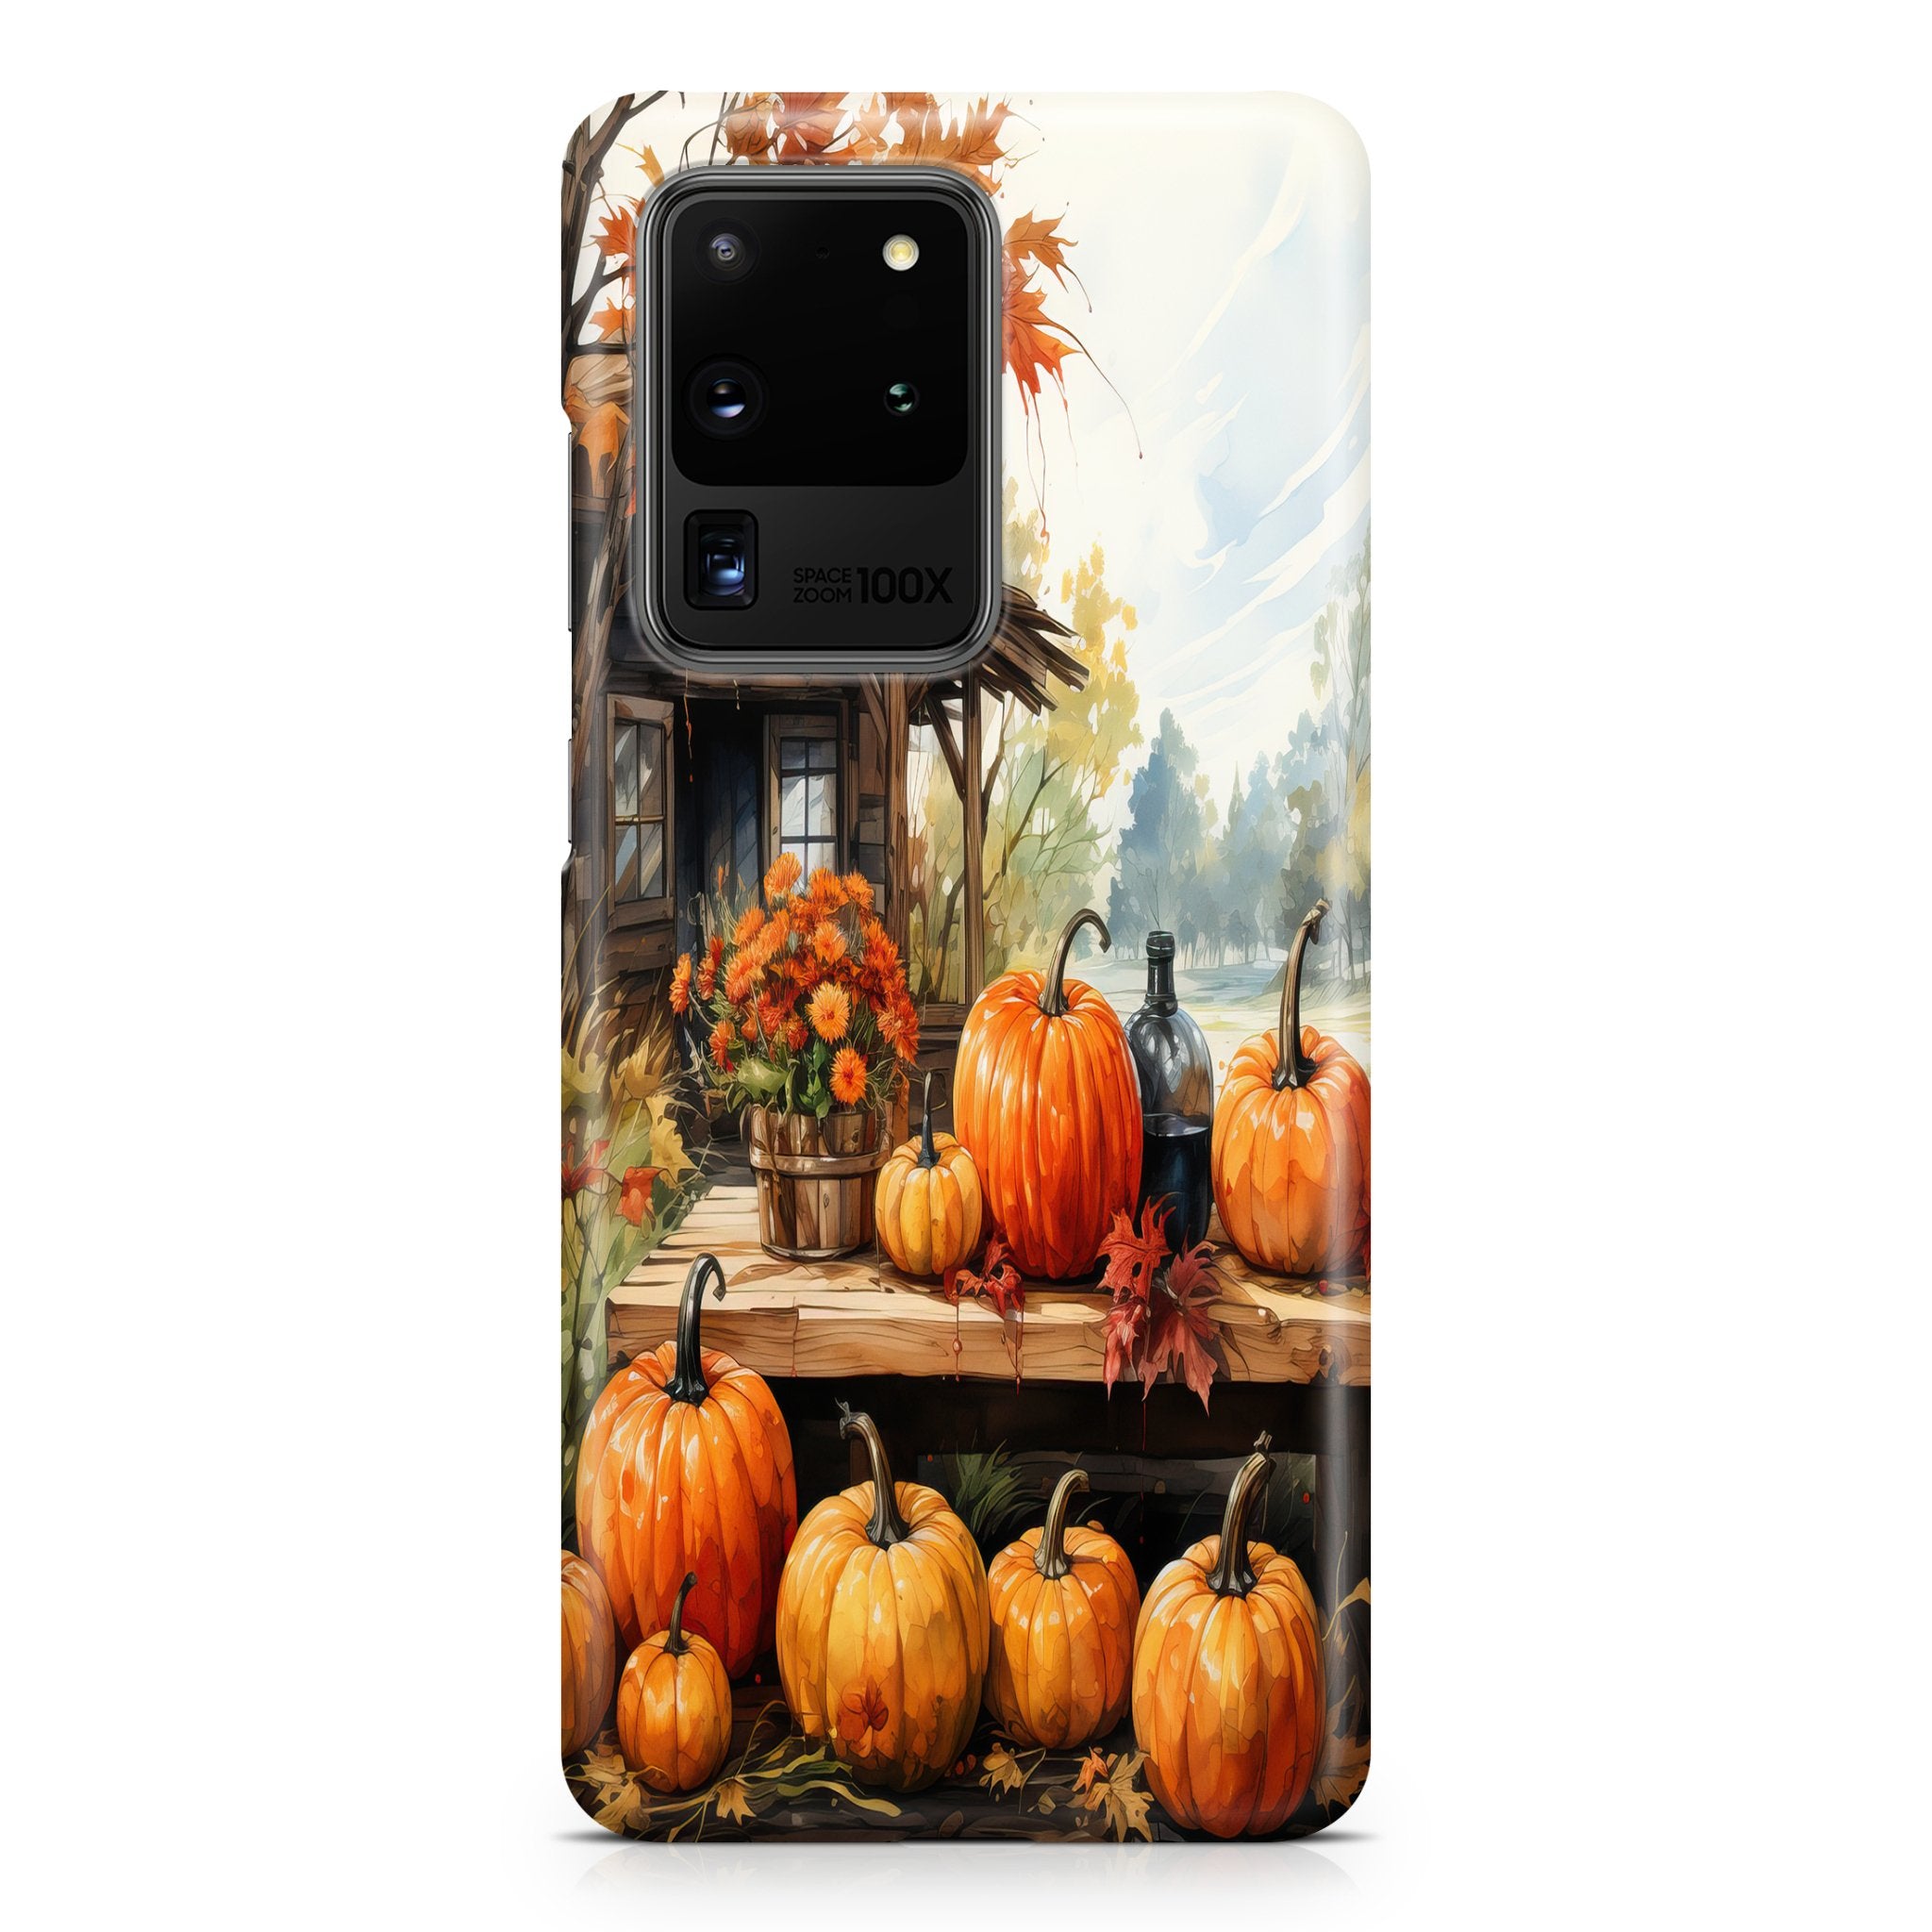 Fall Farm Harvest - Samsung phone case designs by CaseSwagger